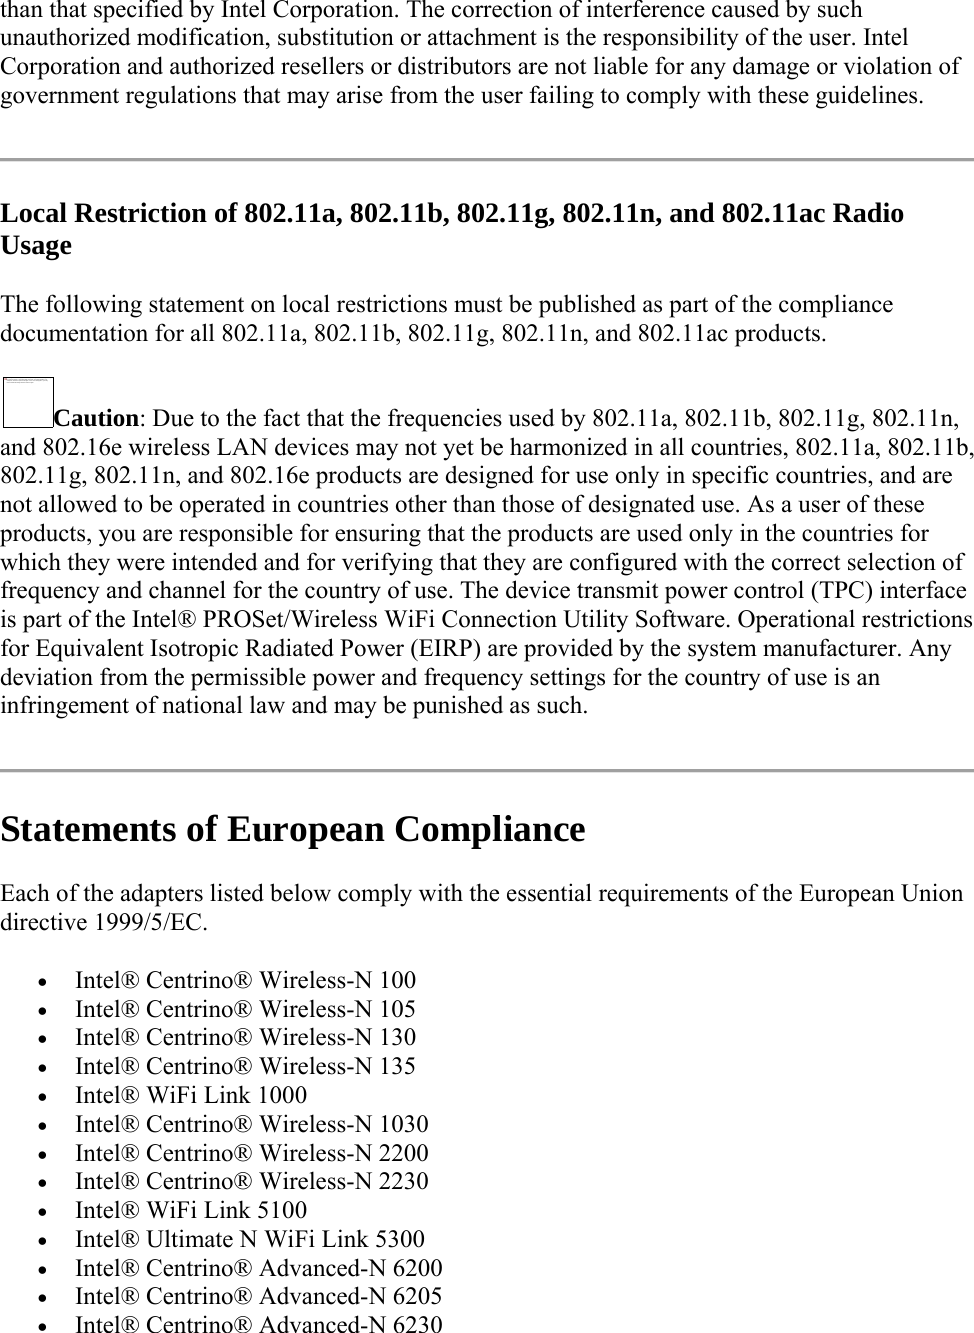 than that specified by Intel Corporation. The correction of interference caused by such unauthorized modification, substitution or attachment is the responsibility of the user. Intel Corporation and authorized resellers or distributors are not liable for any damage or violation of government regulations that may arise from the user failing to comply with these guidelines.  Local Restriction of 802.11a, 802.11b, 802.11g, 802.11n, and 802.11ac Radio Usage The following statement on local restrictions must be published as part of the compliance documentation for all 802.11a, 802.11b, 802.11g, 802.11n, and 802.11ac products.  Caution: Due to the fact that the frequencies used by 802.11a, 802.11b, 802.11g, 802.11n, and 802.16e wireless LAN devices may not yet be harmonized in all countries, 802.11a, 802.11b, 802.11g, 802.11n, and 802.16e products are designed for use only in specific countries, and are not allowed to be operated in countries other than those of designated use. As a user of these products, you are responsible for ensuring that the products are used only in the countries for which they were intended and for verifying that they are configured with the correct selection of frequency and channel for the country of use. The device transmit power control (TPC) interface is part of the Intel® PROSet/Wireless WiFi Connection Utility Software. Operational restrictions for Equivalent Isotropic Radiated Power (EIRP) are provided by the system manufacturer. Any deviation from the permissible power and frequency settings for the country of use is an infringement of national law and may be punished as such.  Statements of European Compliance Each of the adapters listed below comply with the essential requirements of the European Union directive 1999/5/EC.  Intel® Centrino® Wireless-N 100   Intel® Centrino® Wireless-N 105   Intel® Centrino® Wireless-N 130   Intel® Centrino® Wireless-N 135   Intel® WiFi Link 1000   Intel® Centrino® Wireless-N 1030   Intel® Centrino® Wireless-N 2200   Intel® Centrino® Wireless-N 2230  Intel® WiFi Link 5100  Intel® Ultimate N WiFi Link 5300  Intel® Centrino® Advanced-N 6200   Intel® Centrino® Advanced-N 6205   Intel® Centrino® Advanced-N 6230  The image cannot be displayed. Your computer may not have enough memory to open the imag e, or the image may  hav e been co rrupted . Restart yo ur  computer, an d then op en the file again . If the red  x still appears, y ou may  have to del ete the image and  then in sert it again.